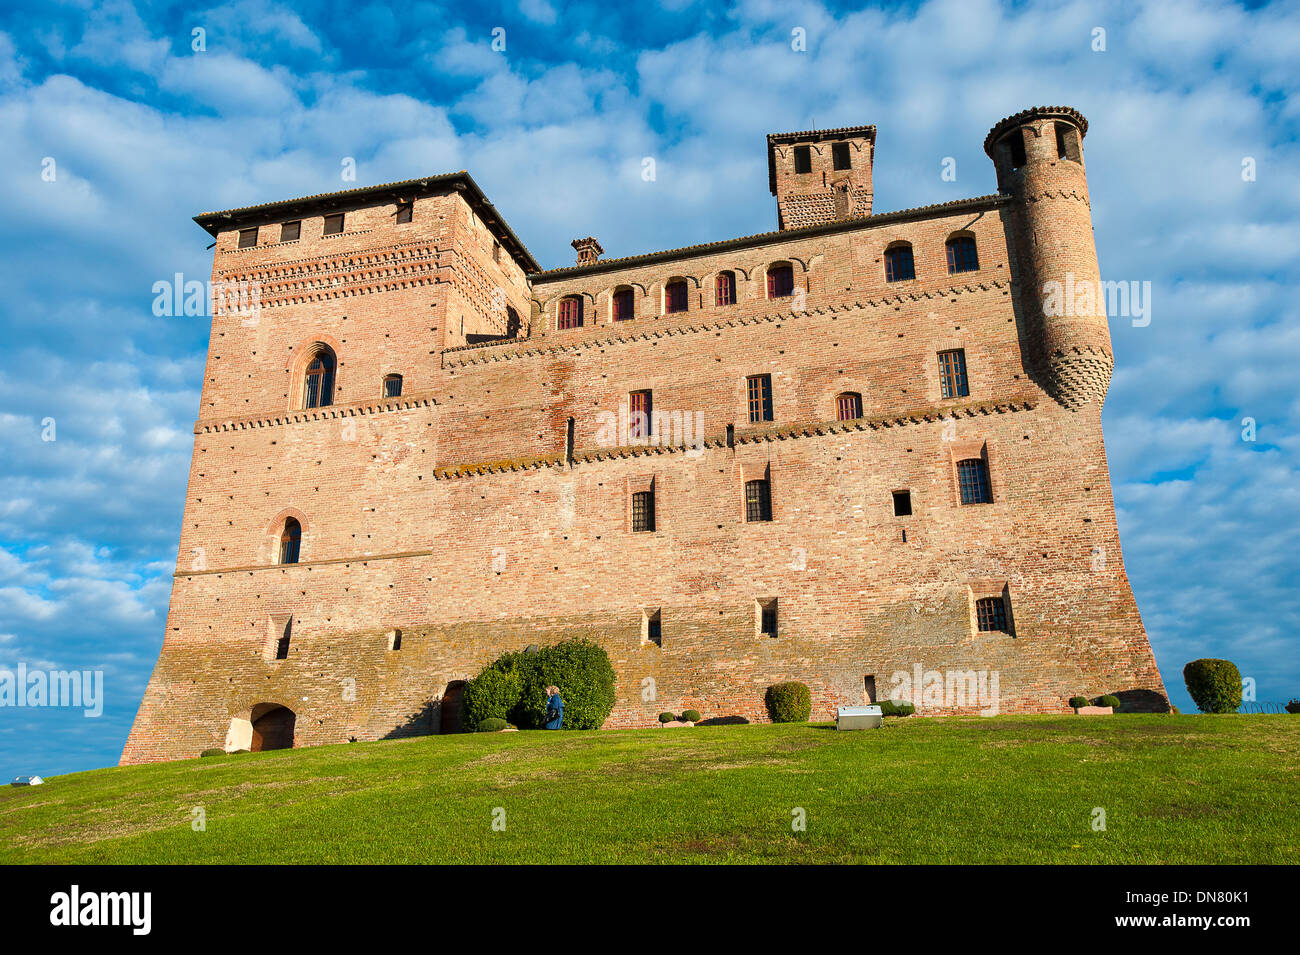 Europe Italy Piedmont Langhe Grinzane Cavour The castle Stock Photo